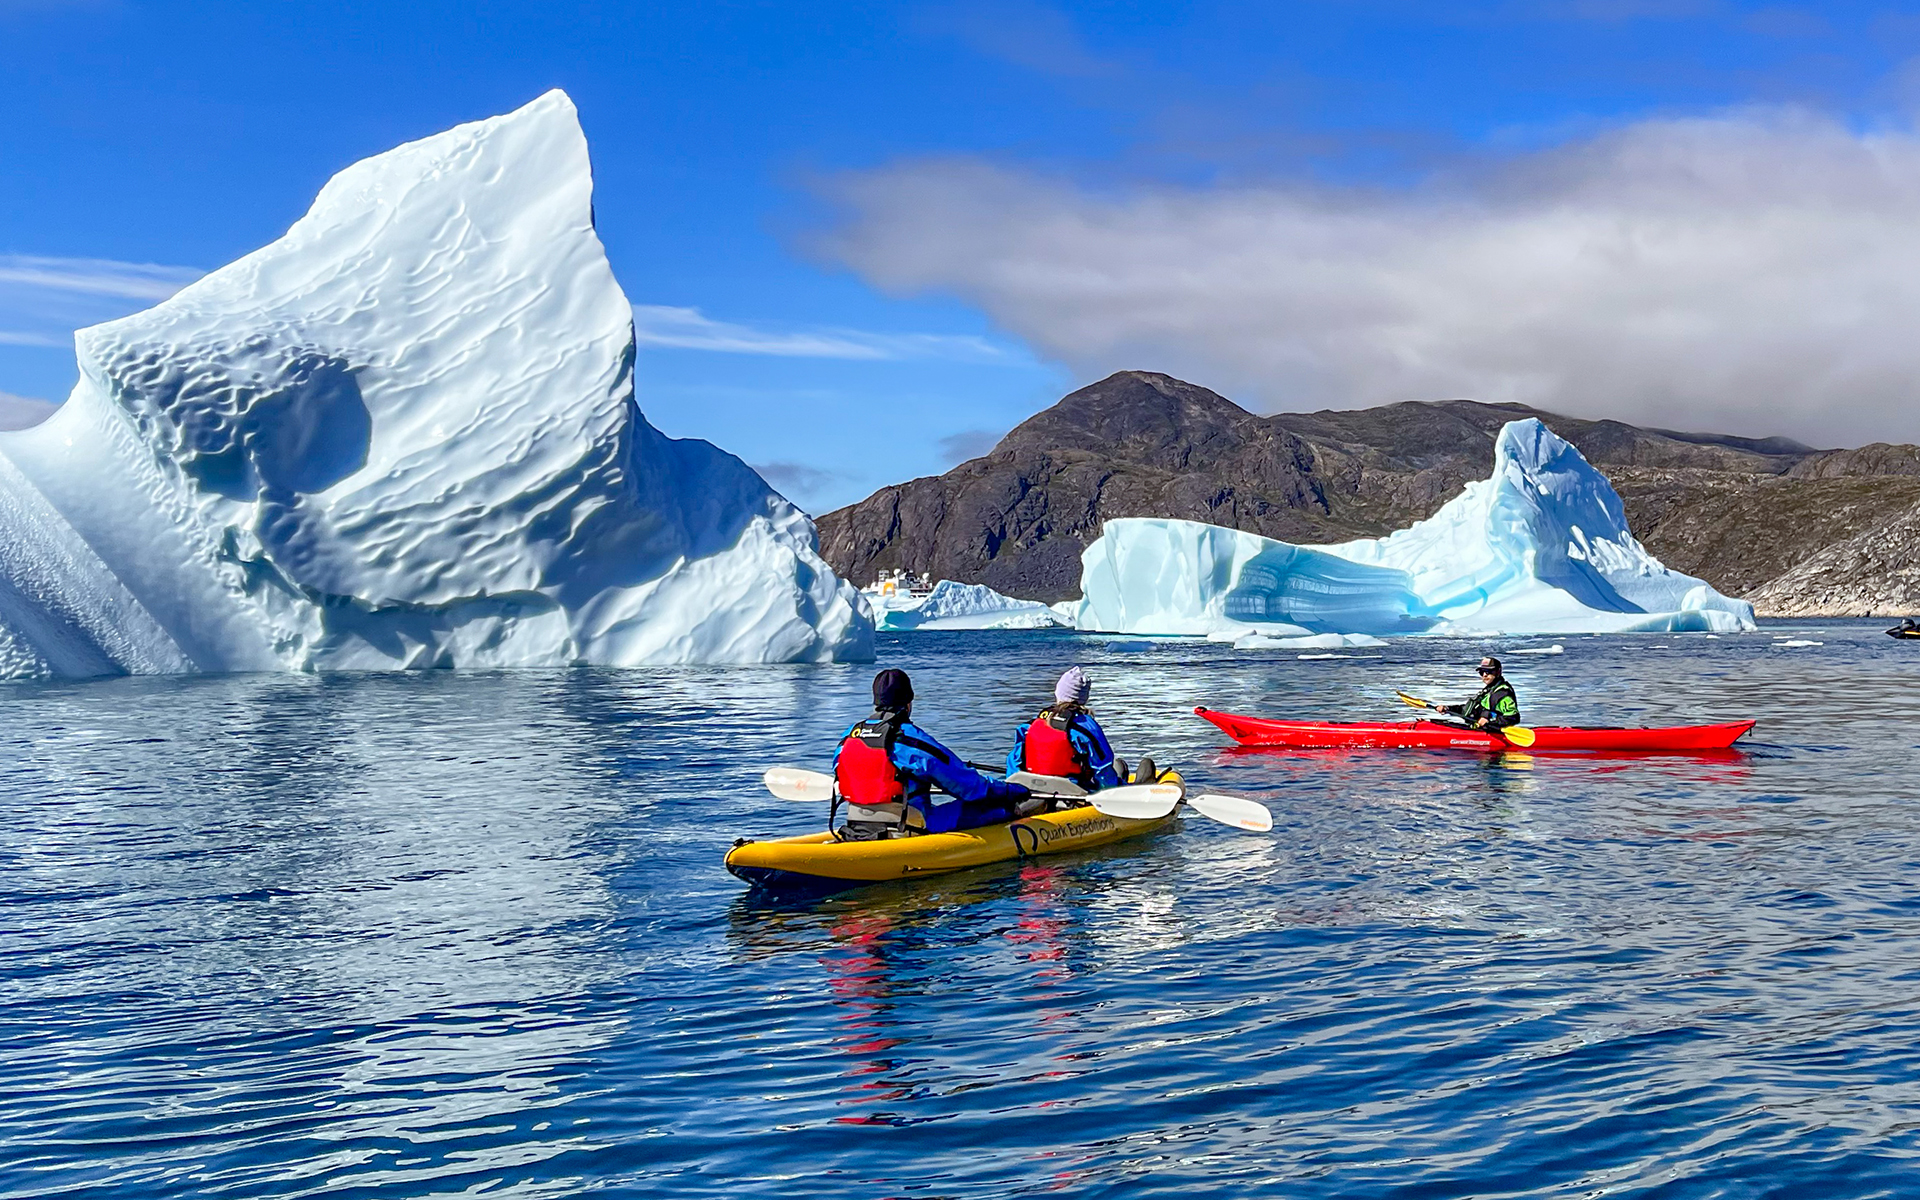 On a sunny day a group of kayakers paddle brightly colored red and yellow kayaks among jagged giant floating icebergs